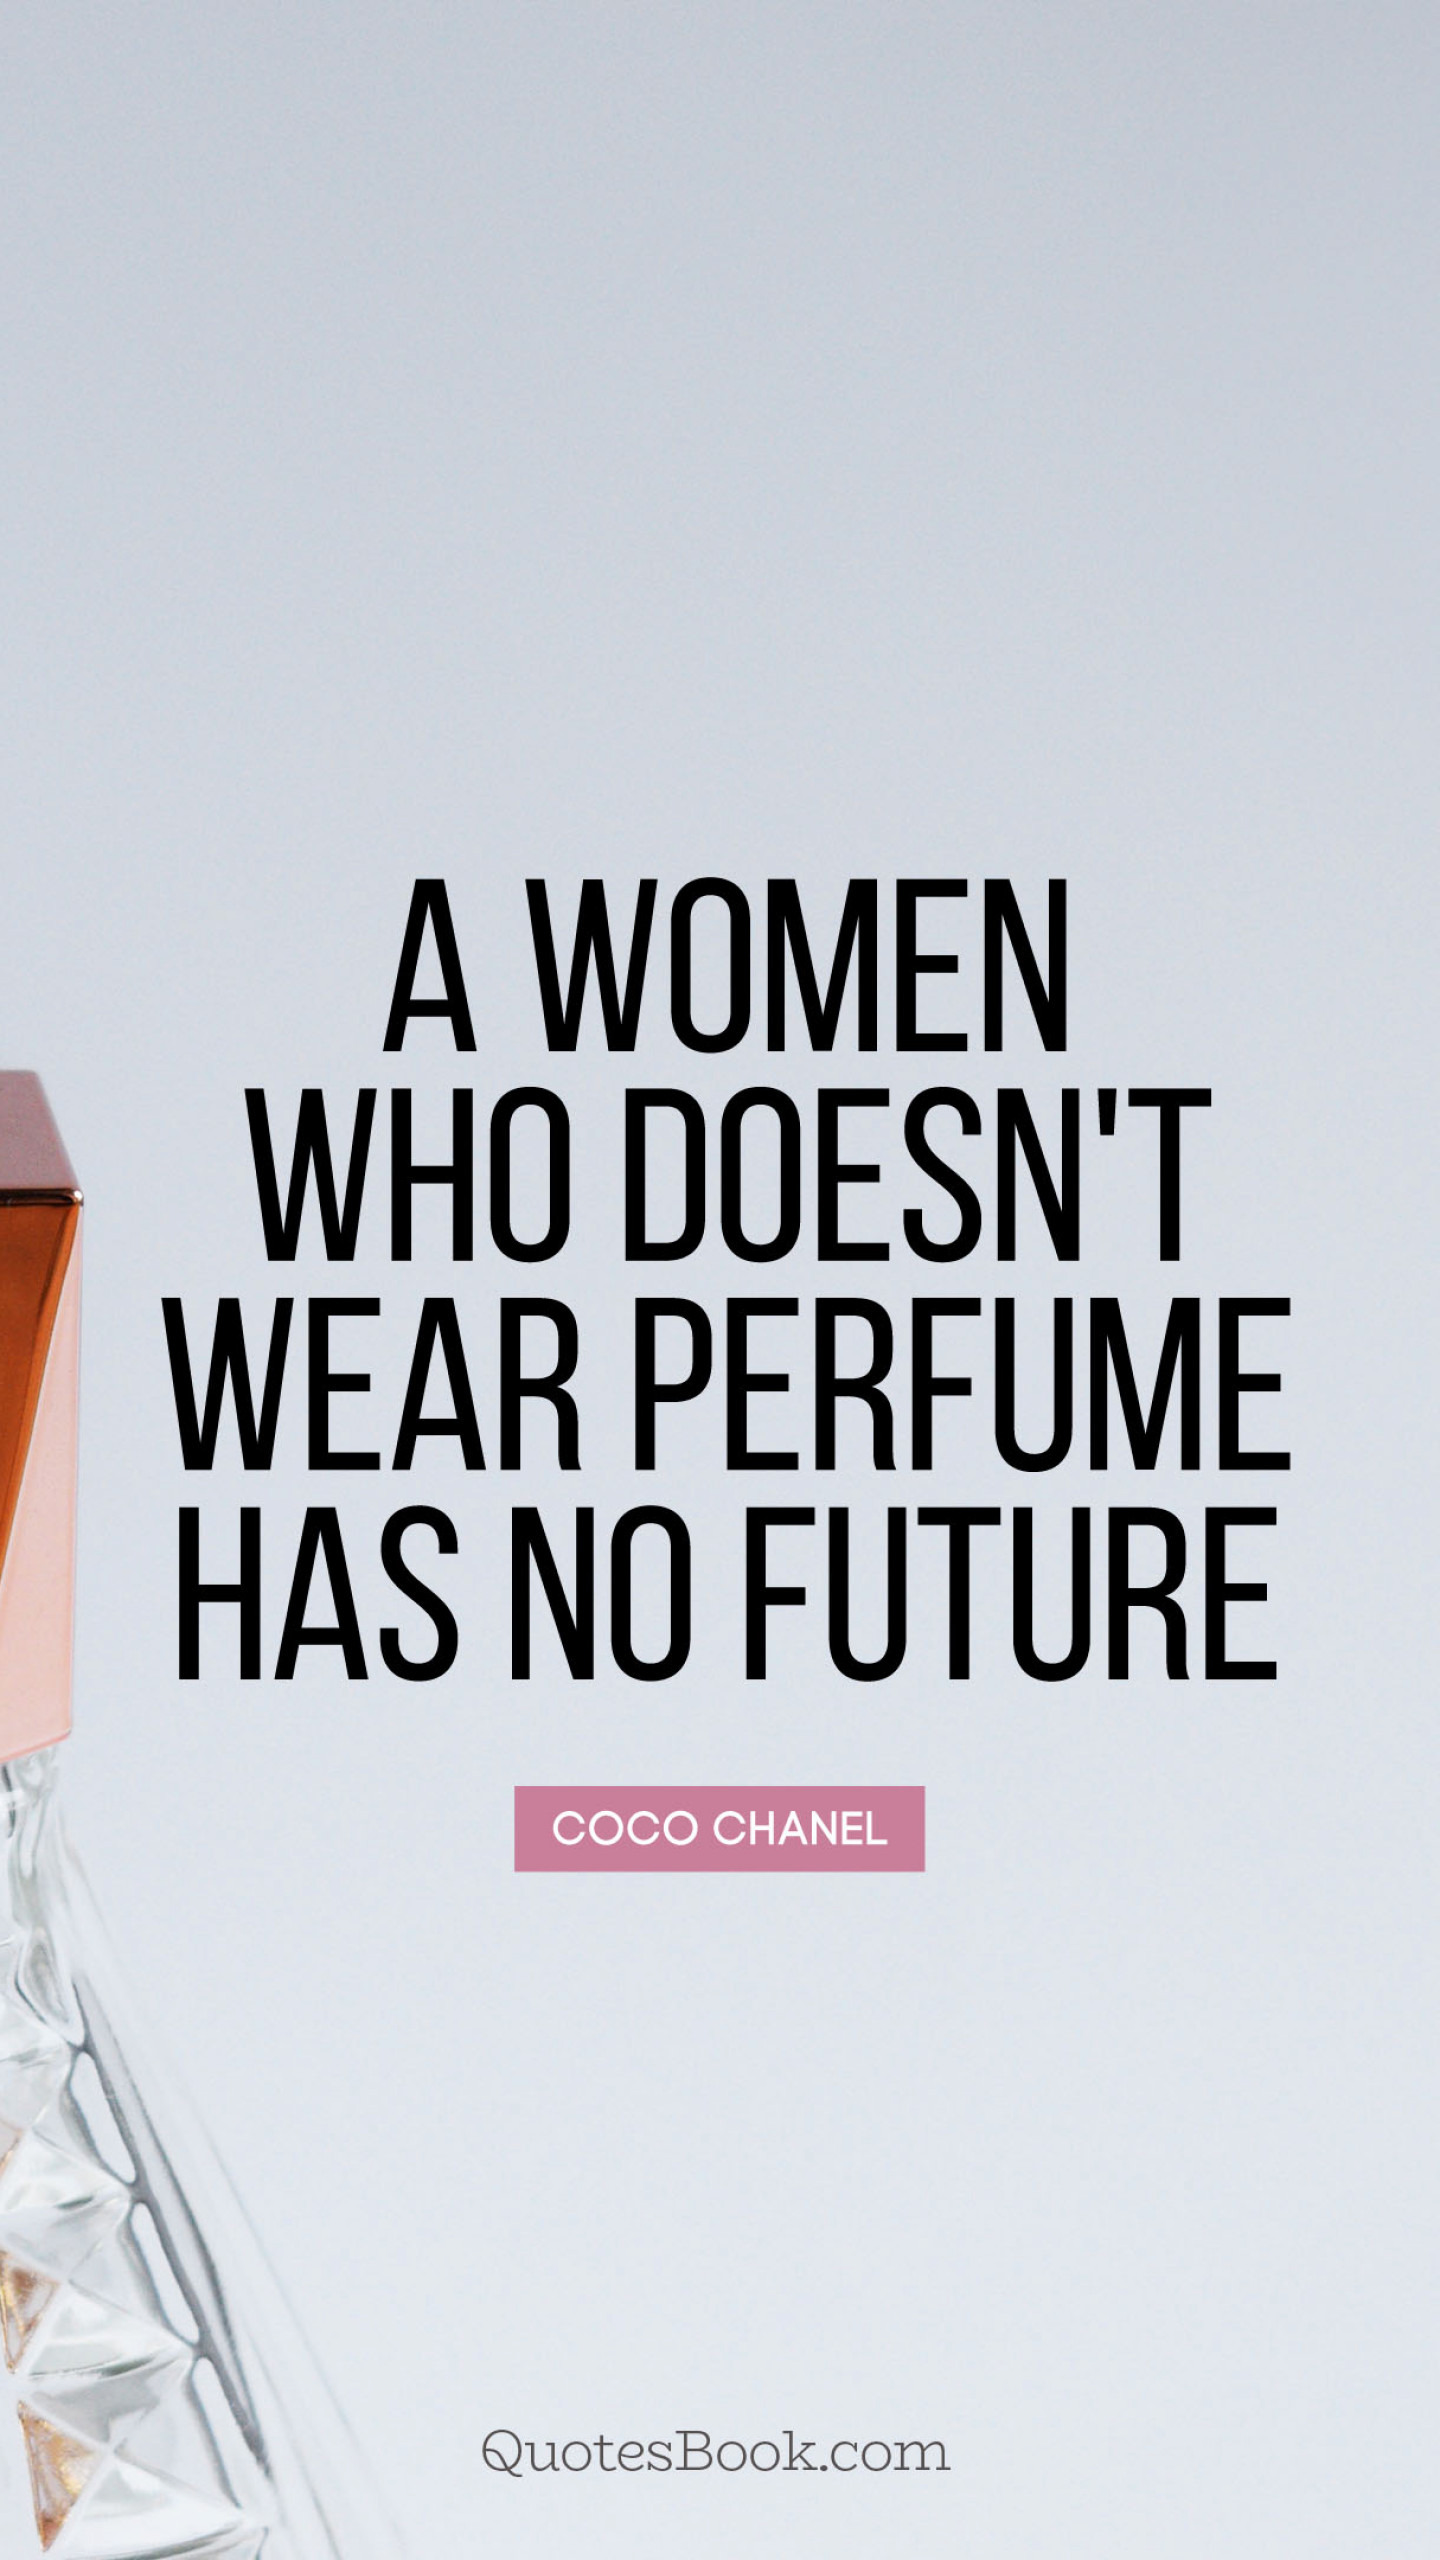 A women who doesn't wear perfume has no future. I don't understand